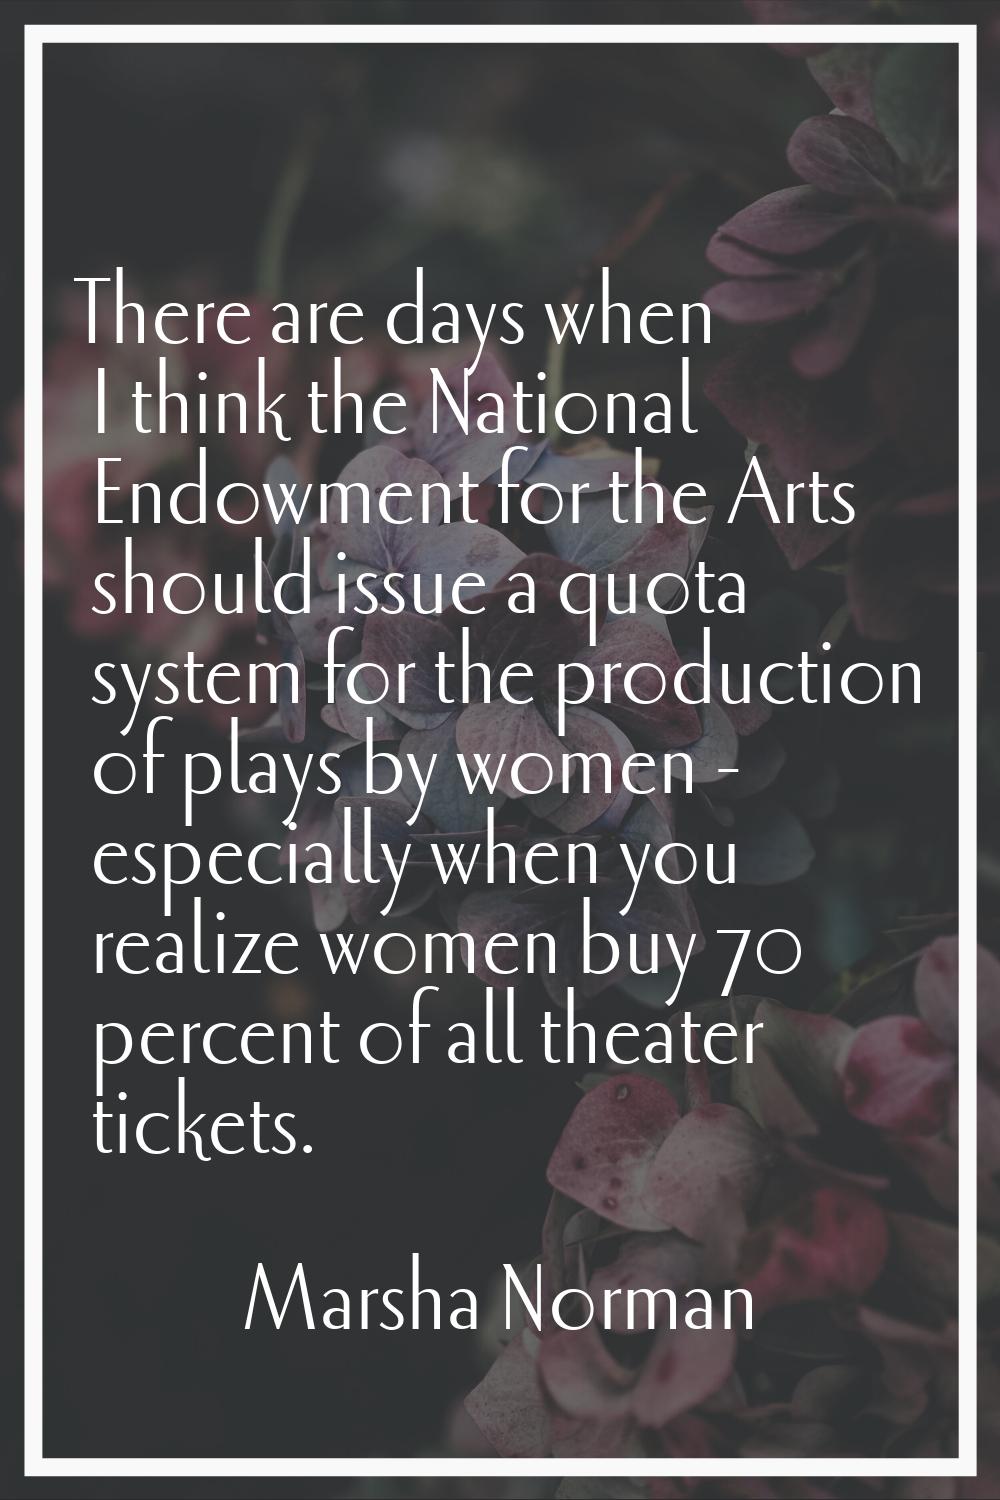 There are days when I think the National Endowment for the Arts should issue a quota system for the